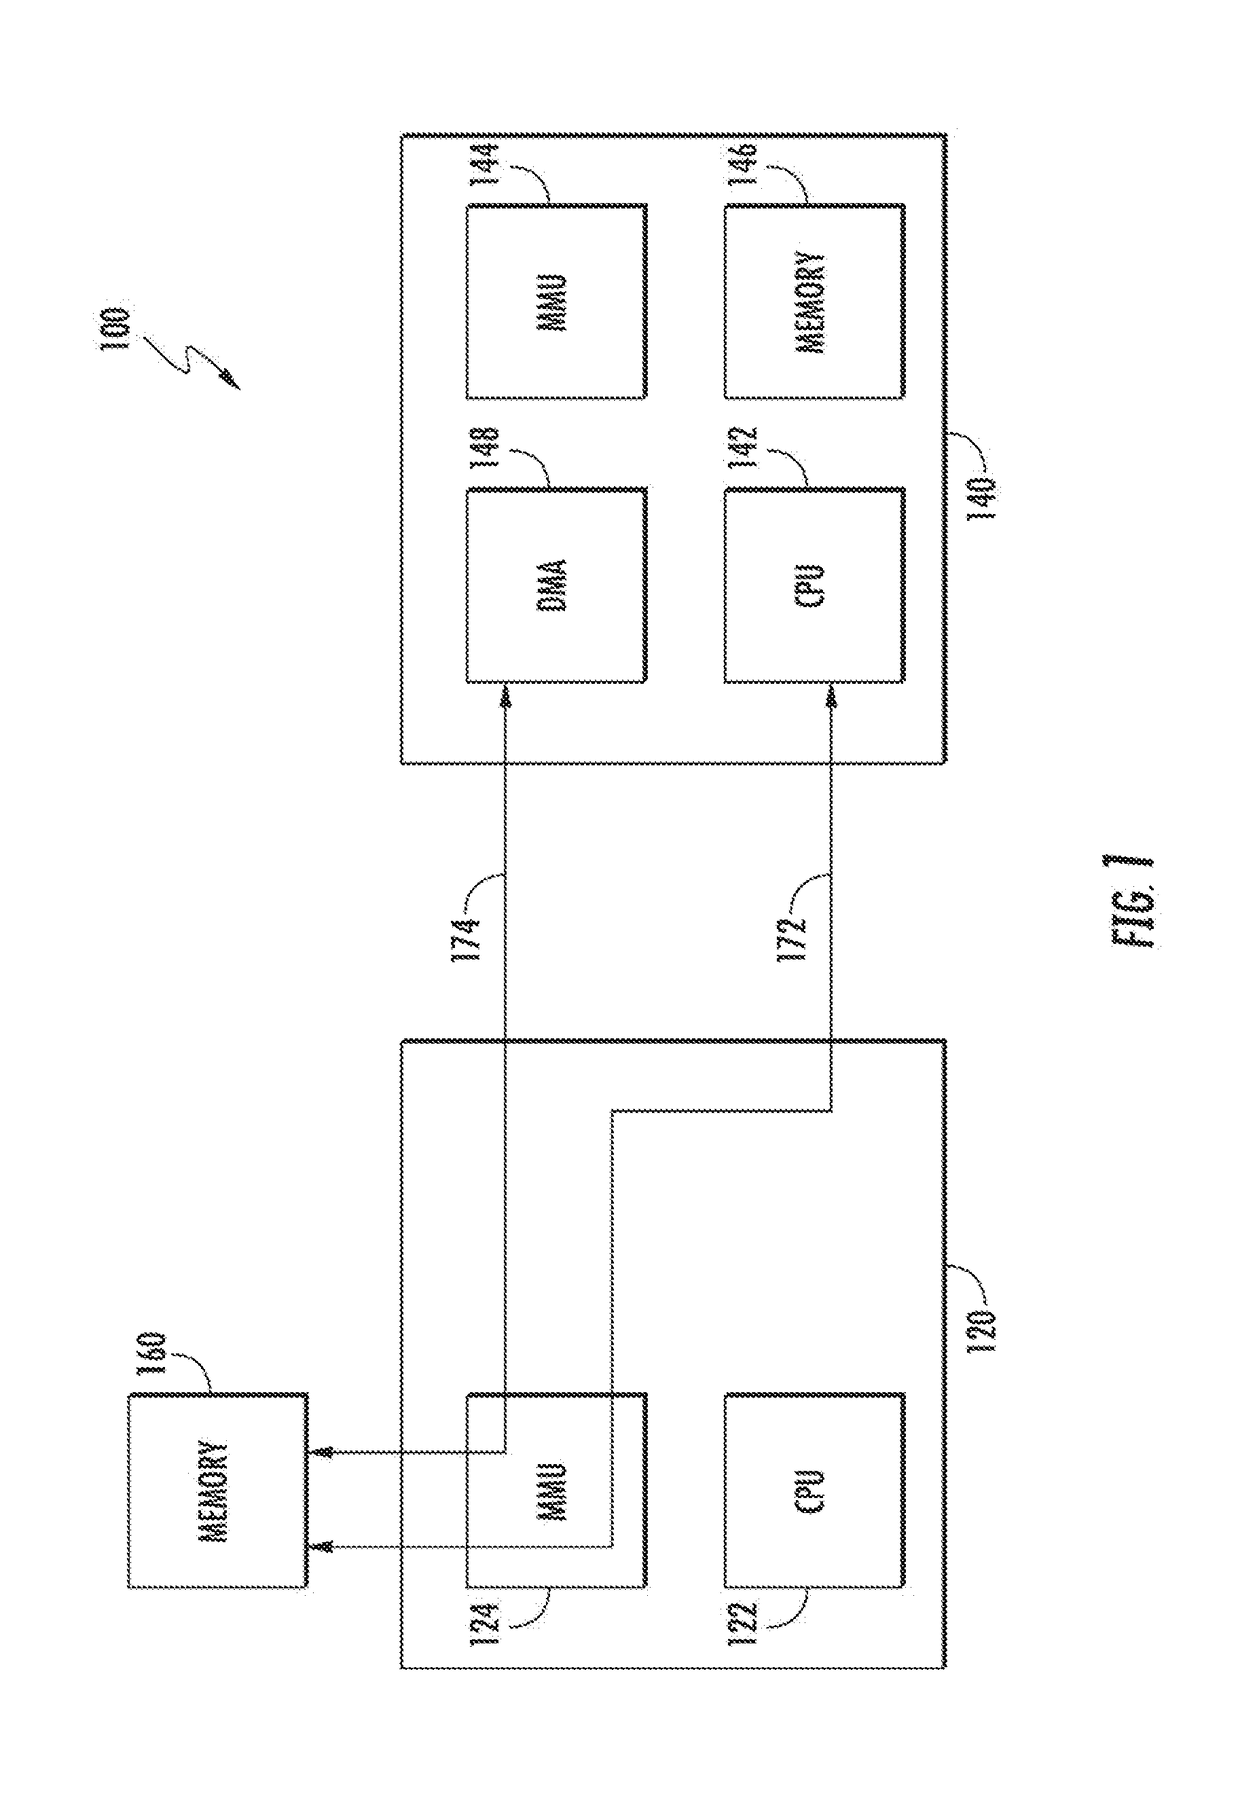 Memory access protection apparatus and methods